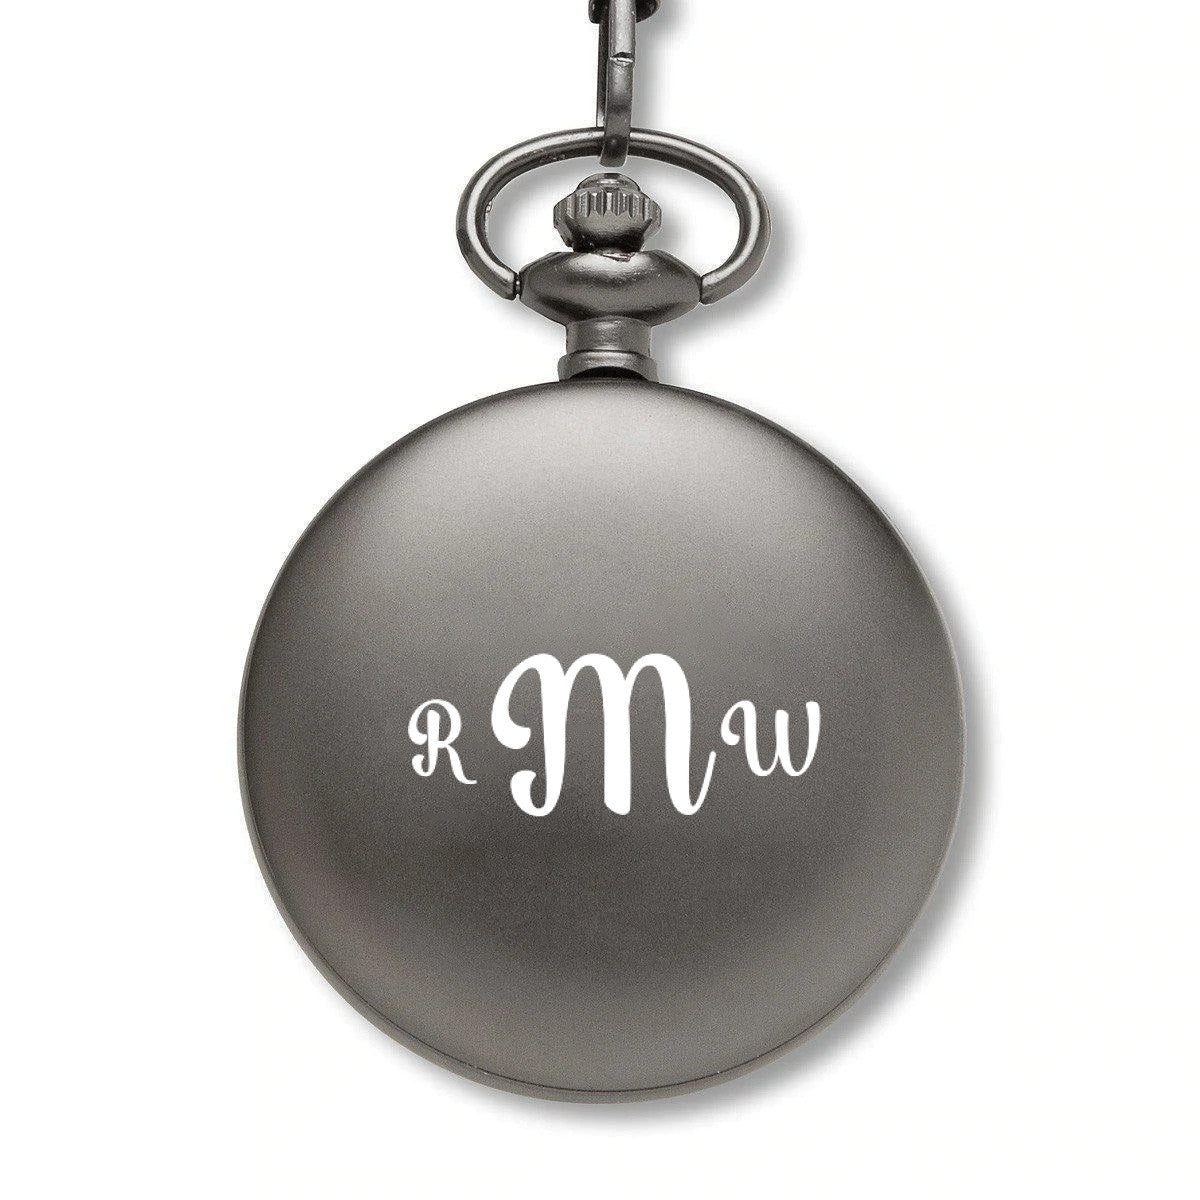 Personalized Open Face Pocket Watch - Monogram Initials